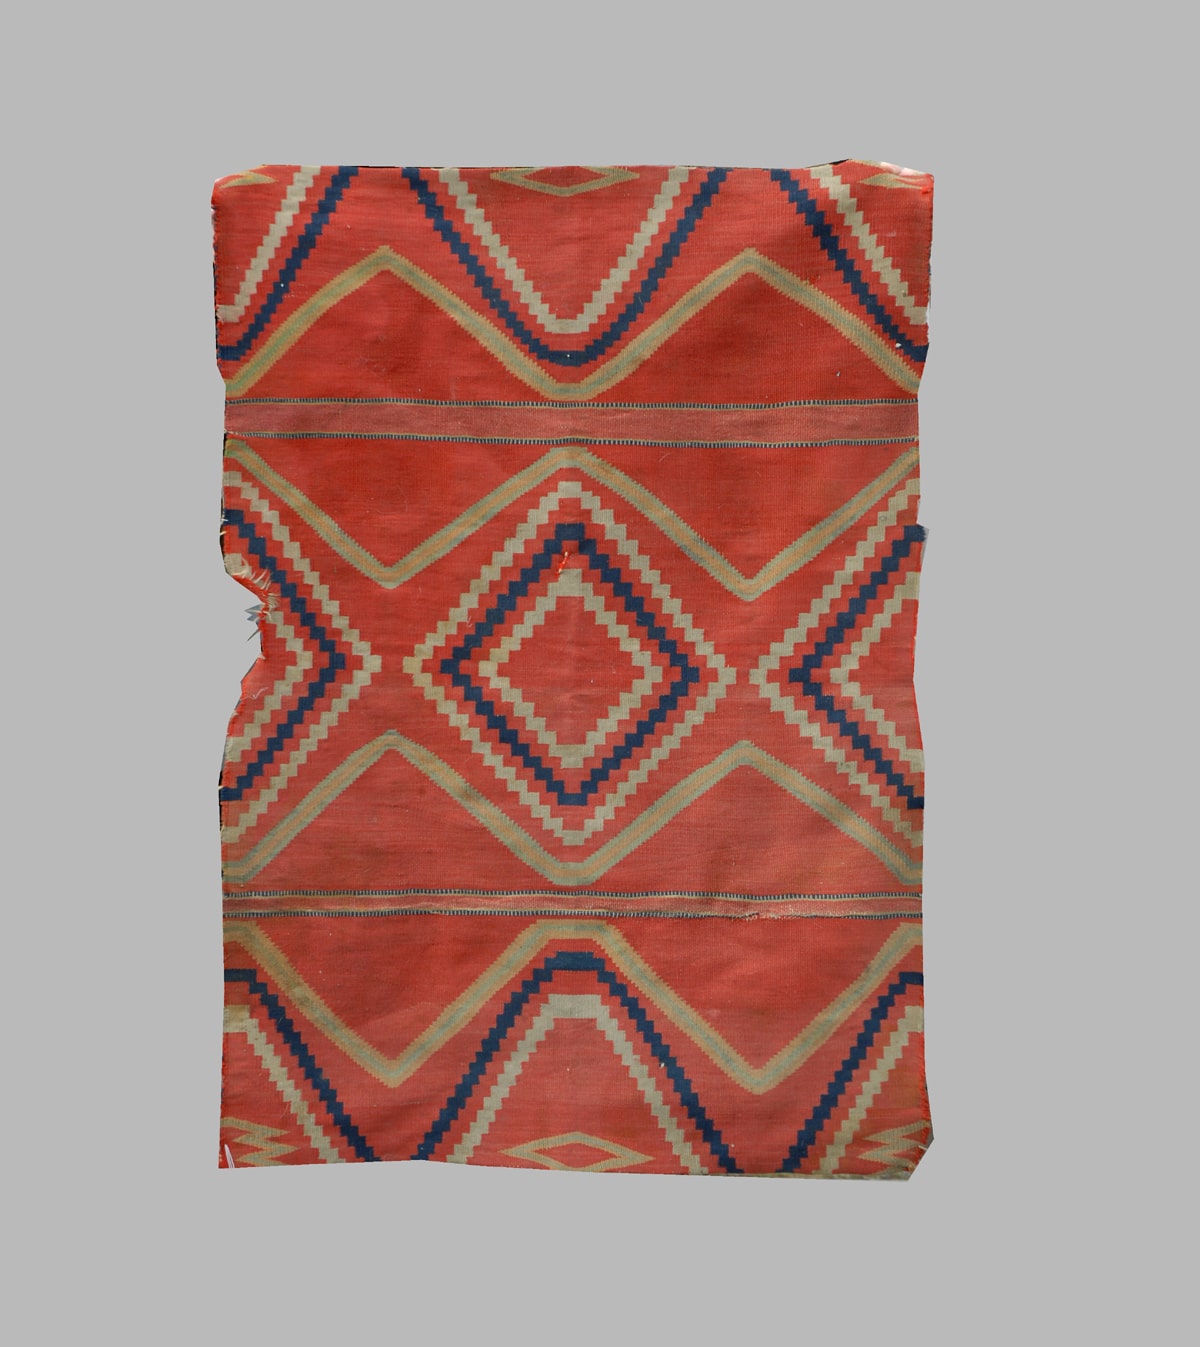 Early classic period Childs Chief blanket, $17,000